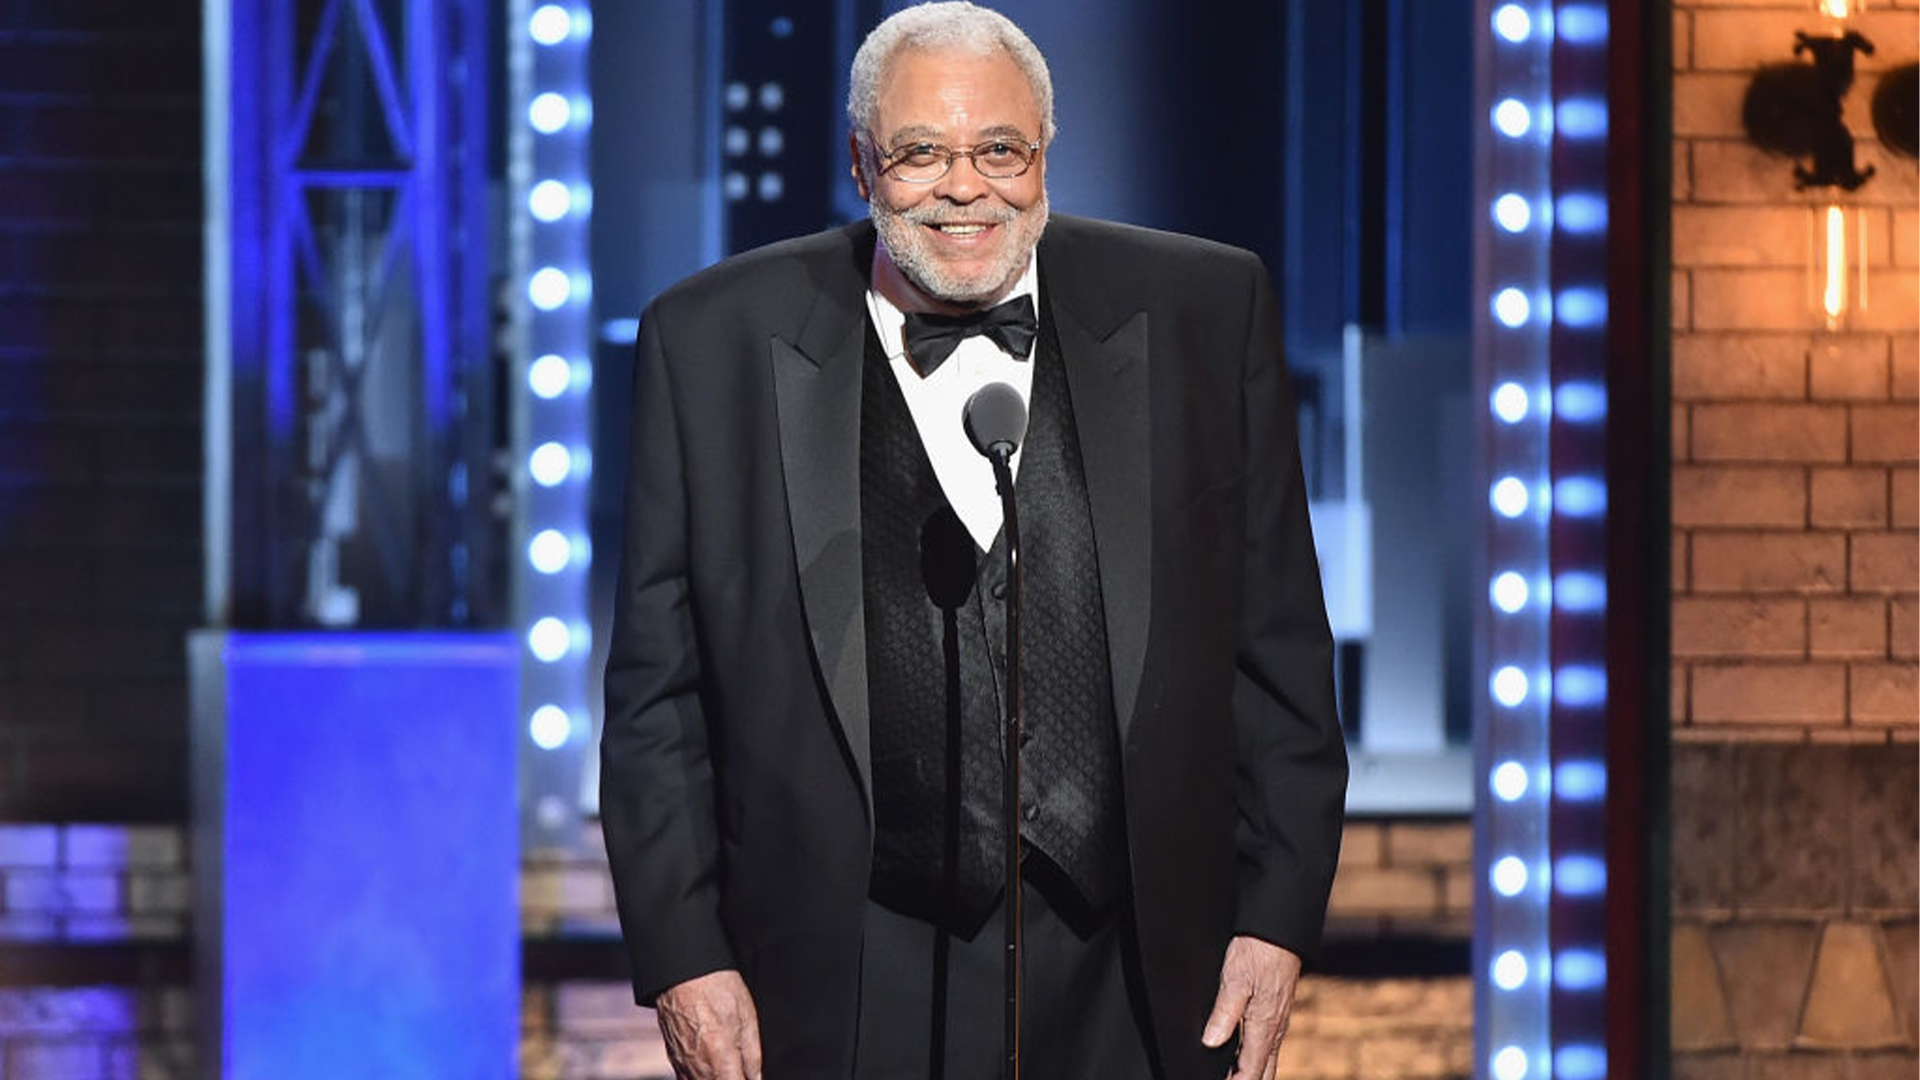 James Earl Jones Once Signed On To Voice Darth Vader For $7K — Now, He's Retiring The Voice And Handing It To Artificial Intelligence